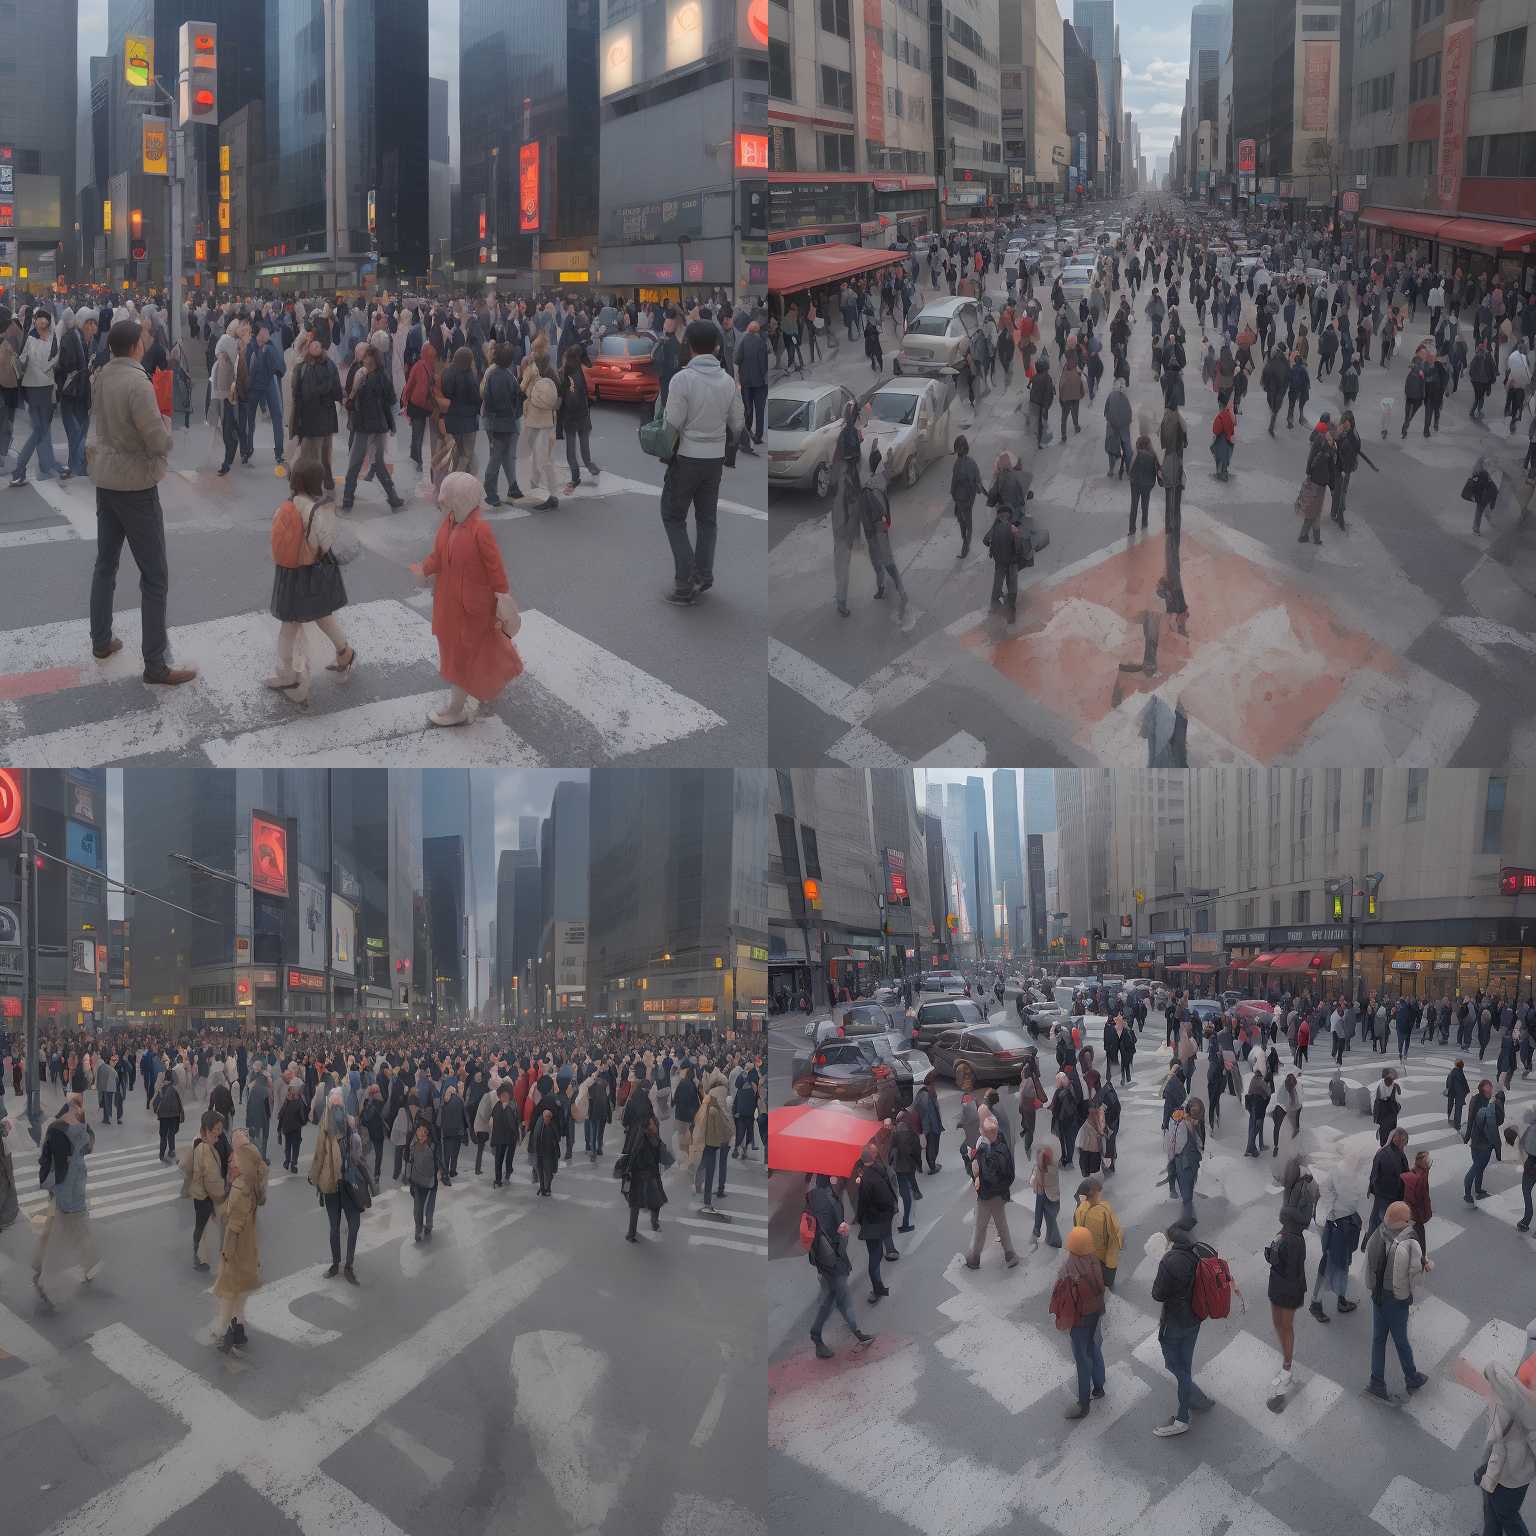 A crowded crosswalk with a red pedestrian signal